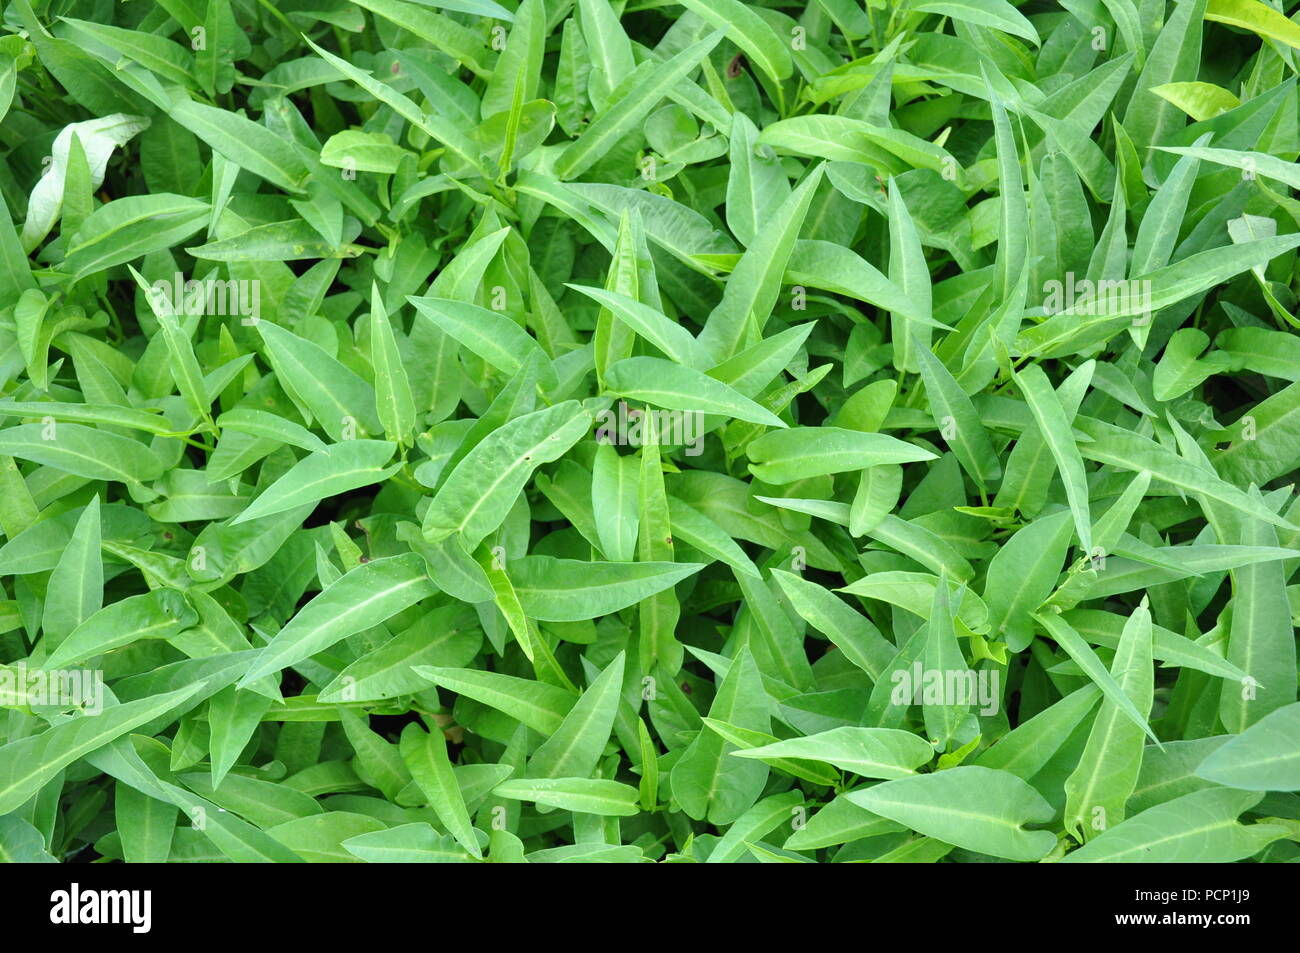 Water spinach Stock Photo